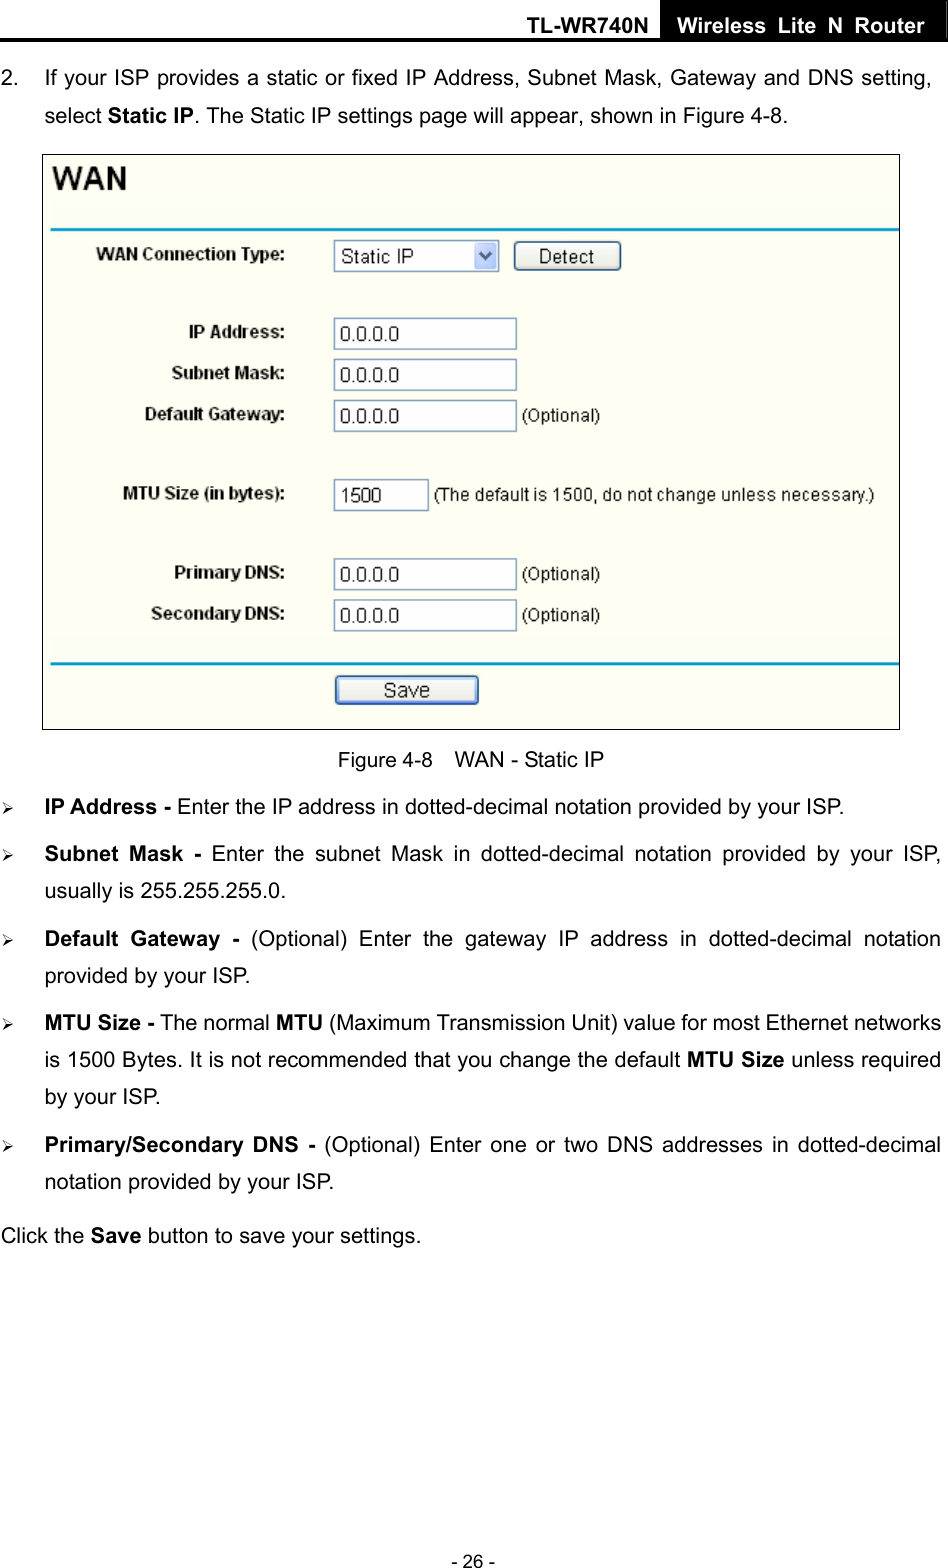 TL-WR740N Wireless Lite N Router  - 26 - 2.  If your ISP provides a static or fixed IP Address, Subnet Mask, Gateway and DNS setting, select Static IP. The Static IP settings page will appear, shown in Figure 4-8.  Figure 4-8    WAN - Static IP ¾ IP Address - Enter the IP address in dotted-decimal notation provided by your ISP. ¾ Subnet Mask - Enter the subnet Mask in dotted-decimal notation provided by your ISP, usually is 255.255.255.0. ¾ Default Gateway - (Optional) Enter the gateway IP address in dotted-decimal notation provided by your ISP. ¾ MTU Size - The normal MTU (Maximum Transmission Unit) value for most Ethernet networks is 1500 Bytes. It is not recommended that you change the default MTU Size unless required by your ISP.   ¾ Primary/Secondary DNS - (Optional) Enter one or two DNS addresses in dotted-decimal notation provided by your ISP. Click the Save button to save your settings. 